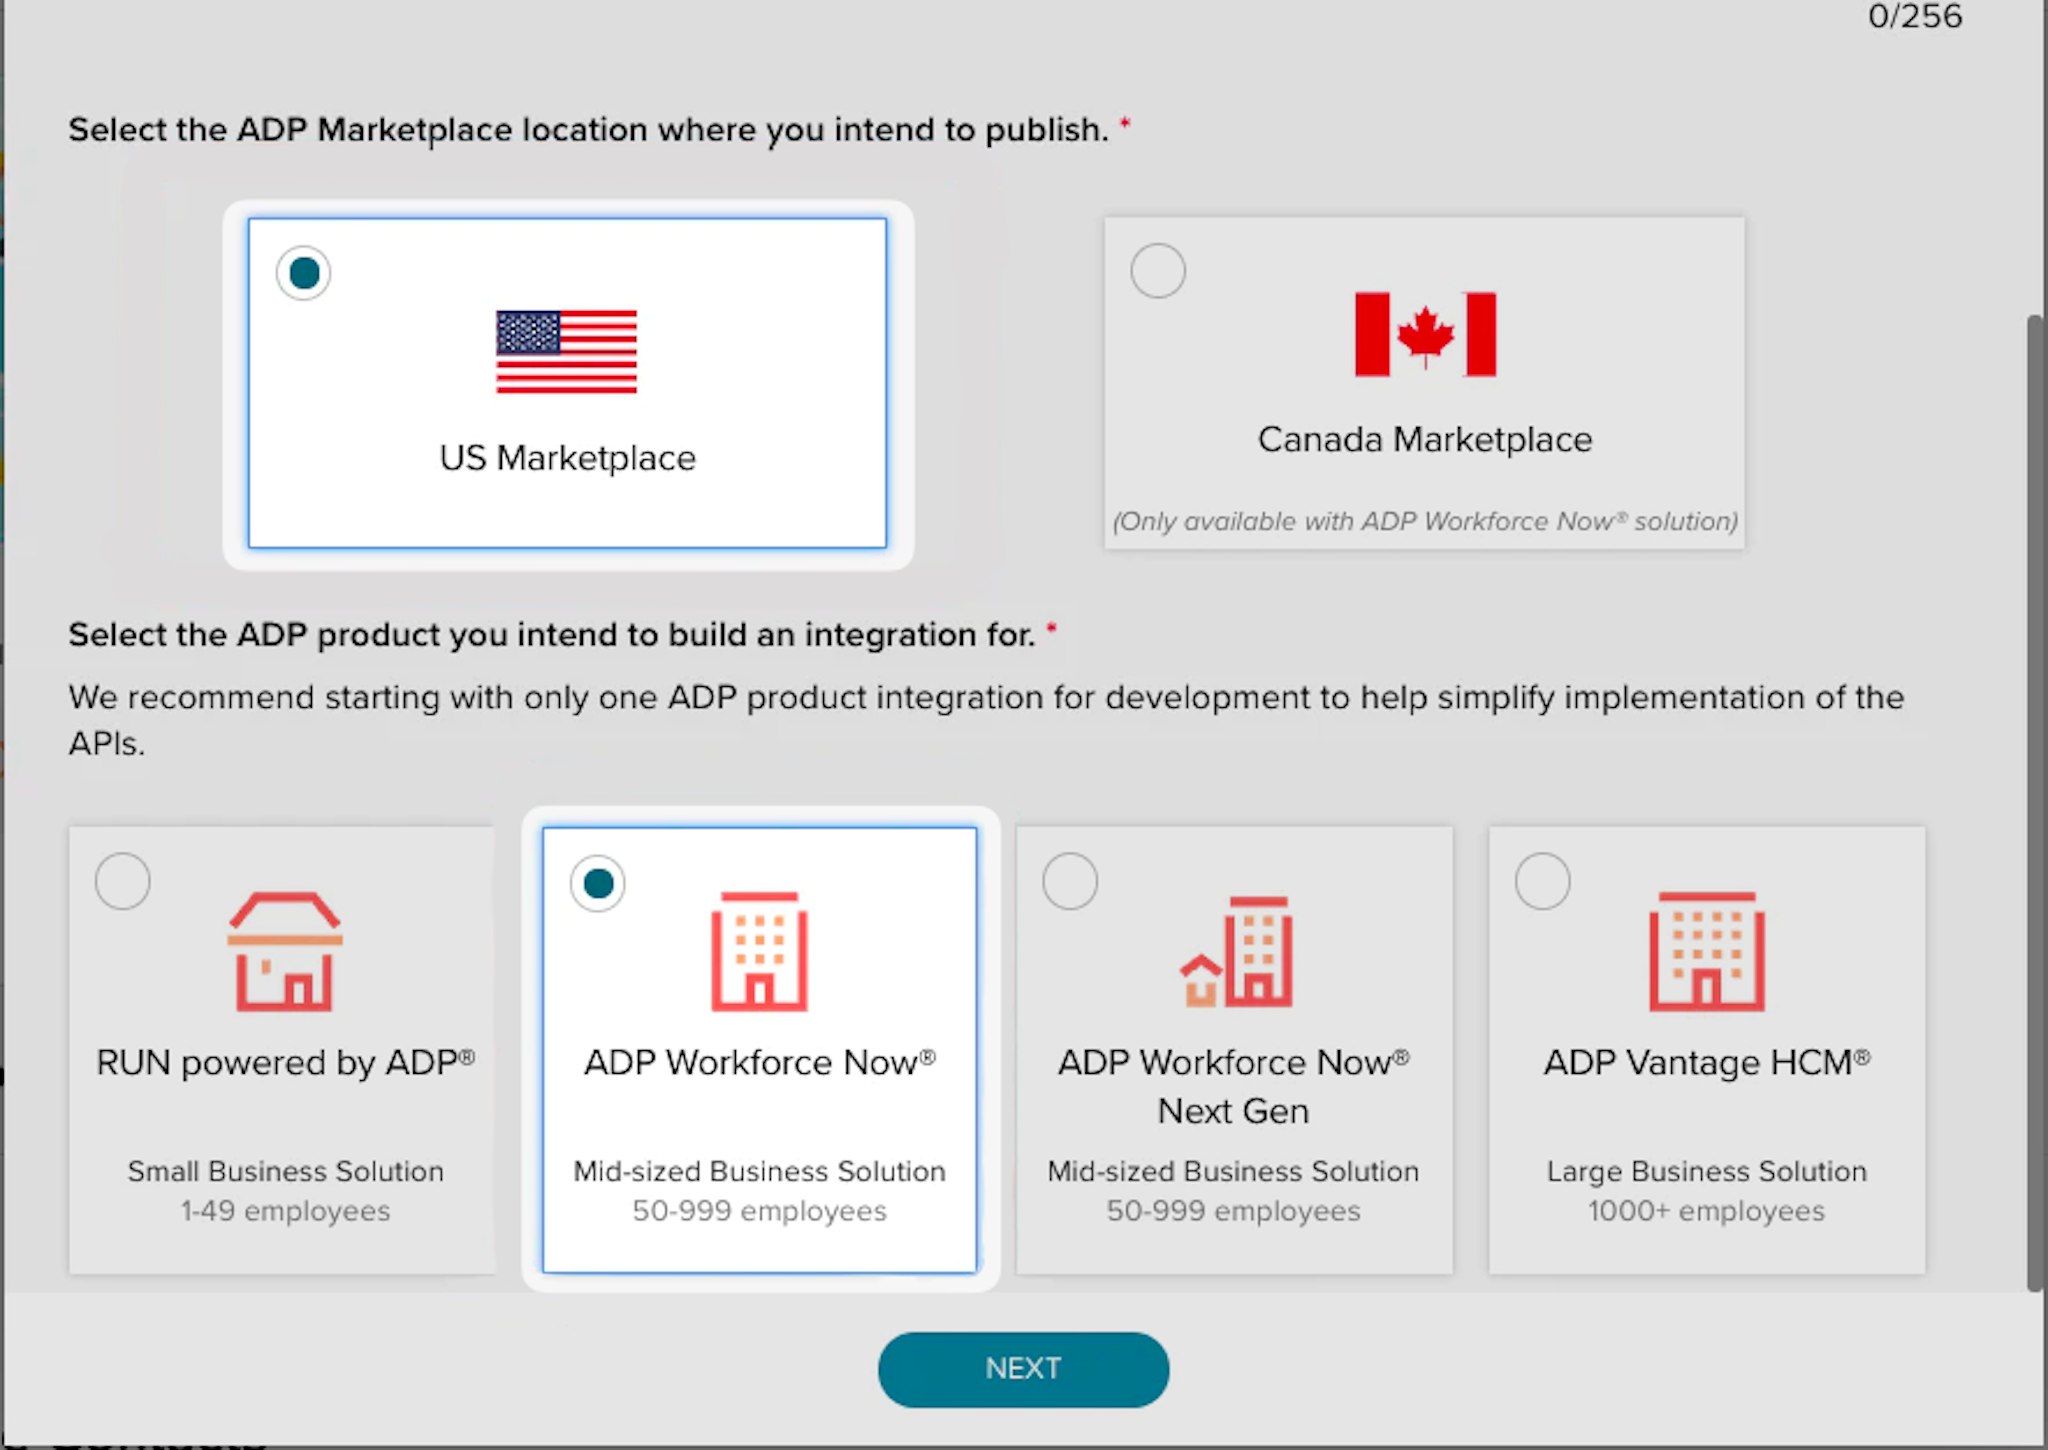 A screenshot showing selection options for the ADP Marketplace in the ADP Partner Self Service Portal.